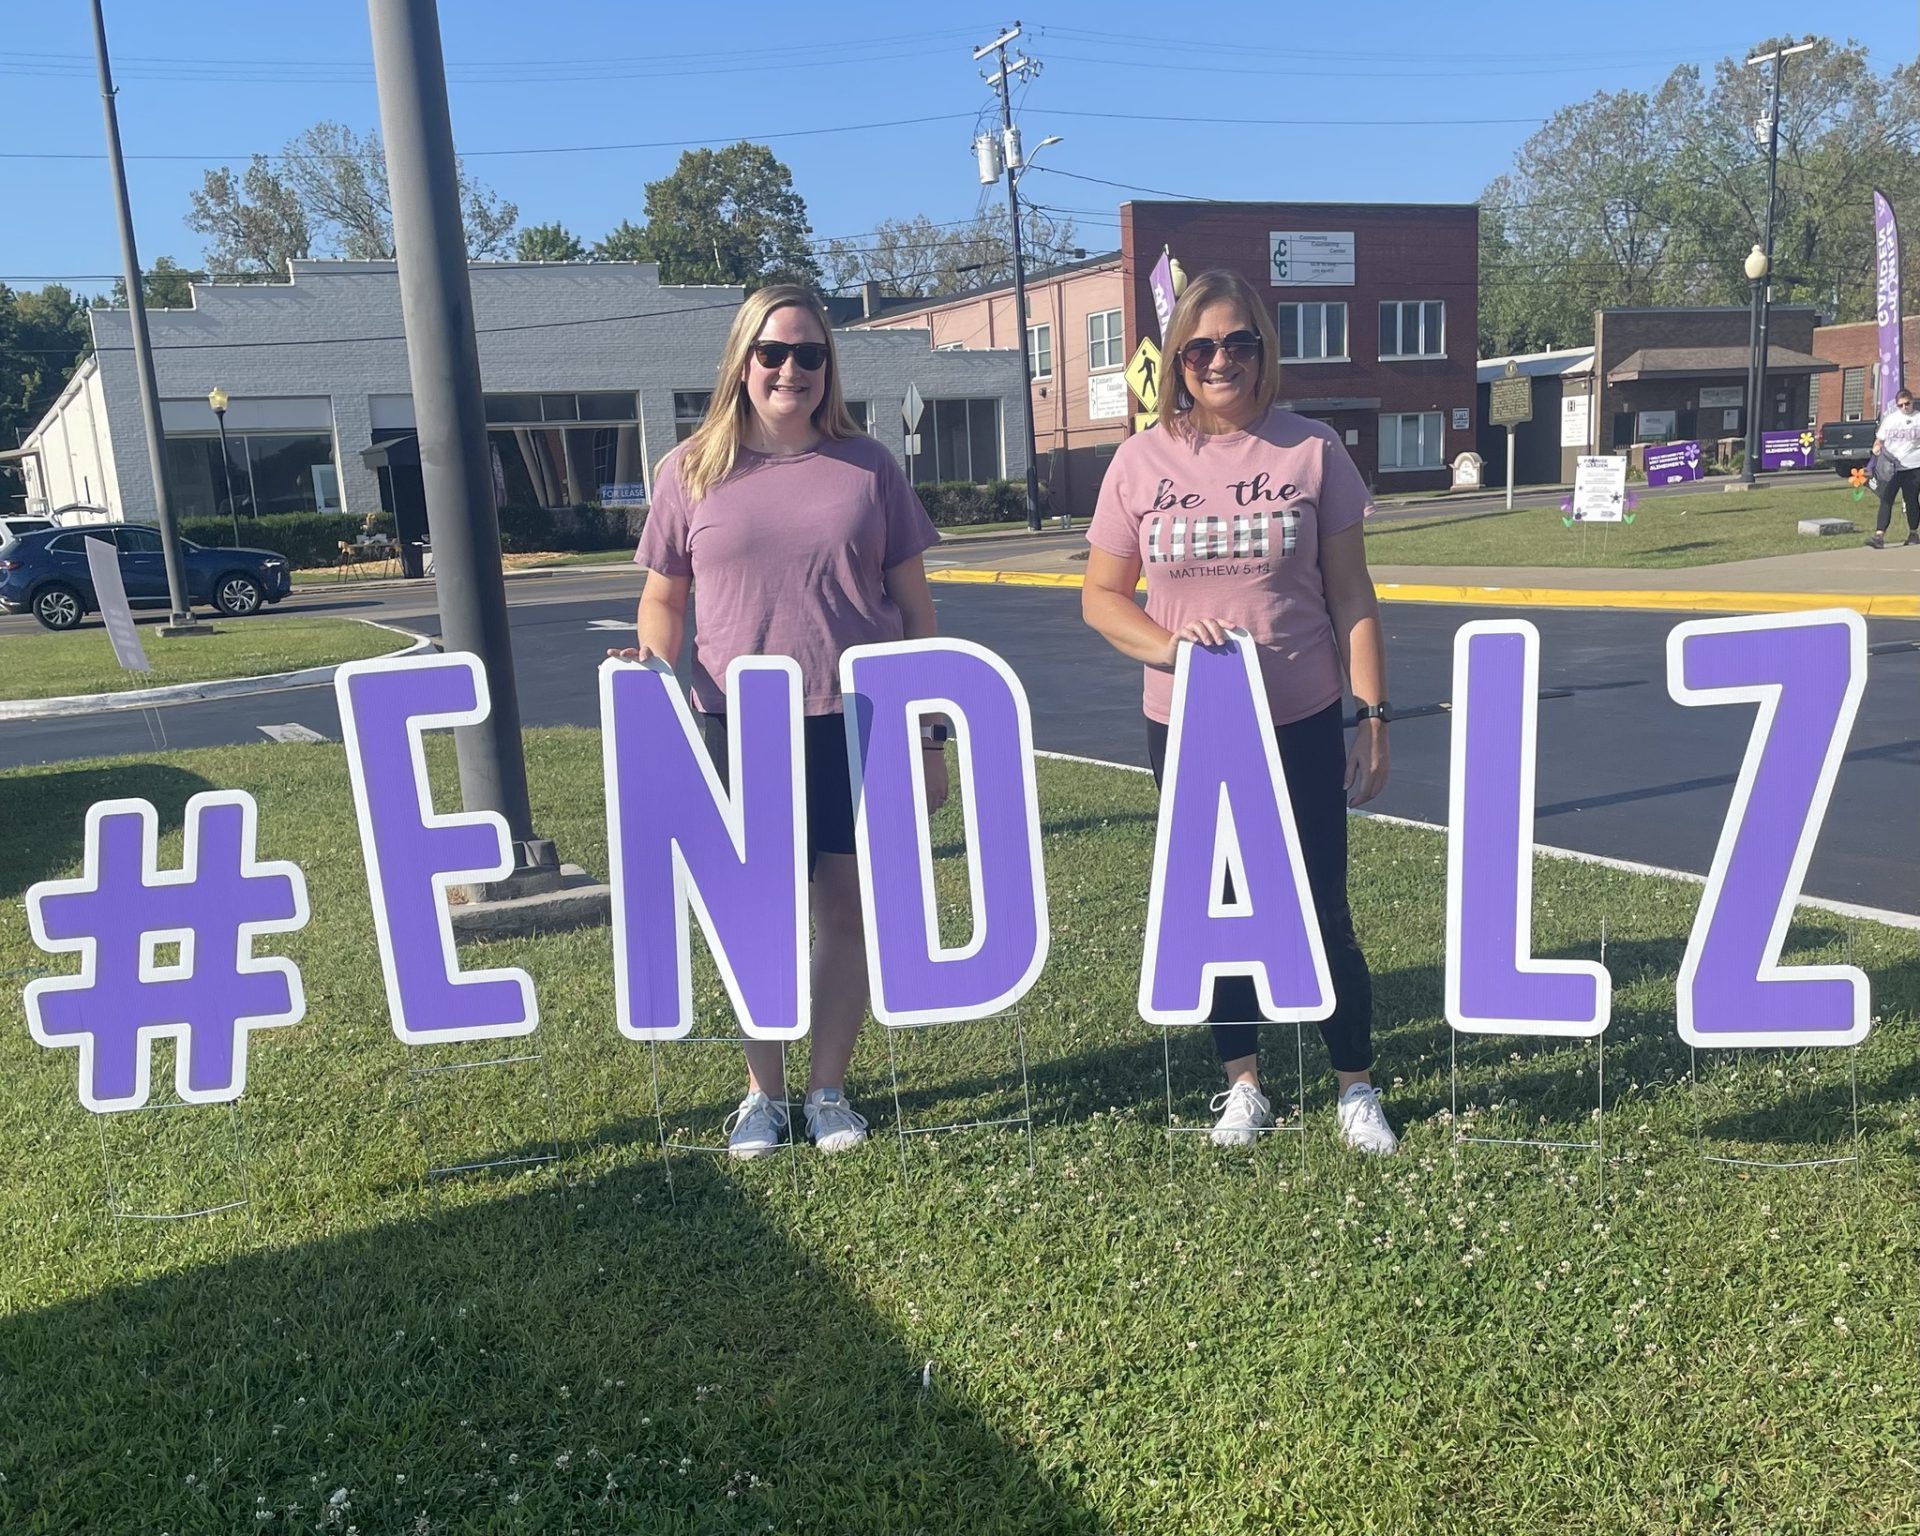 Members of the Crow Estate Planning & Probate firm at a Pennyrile Walk to End Alzheimer’s event.